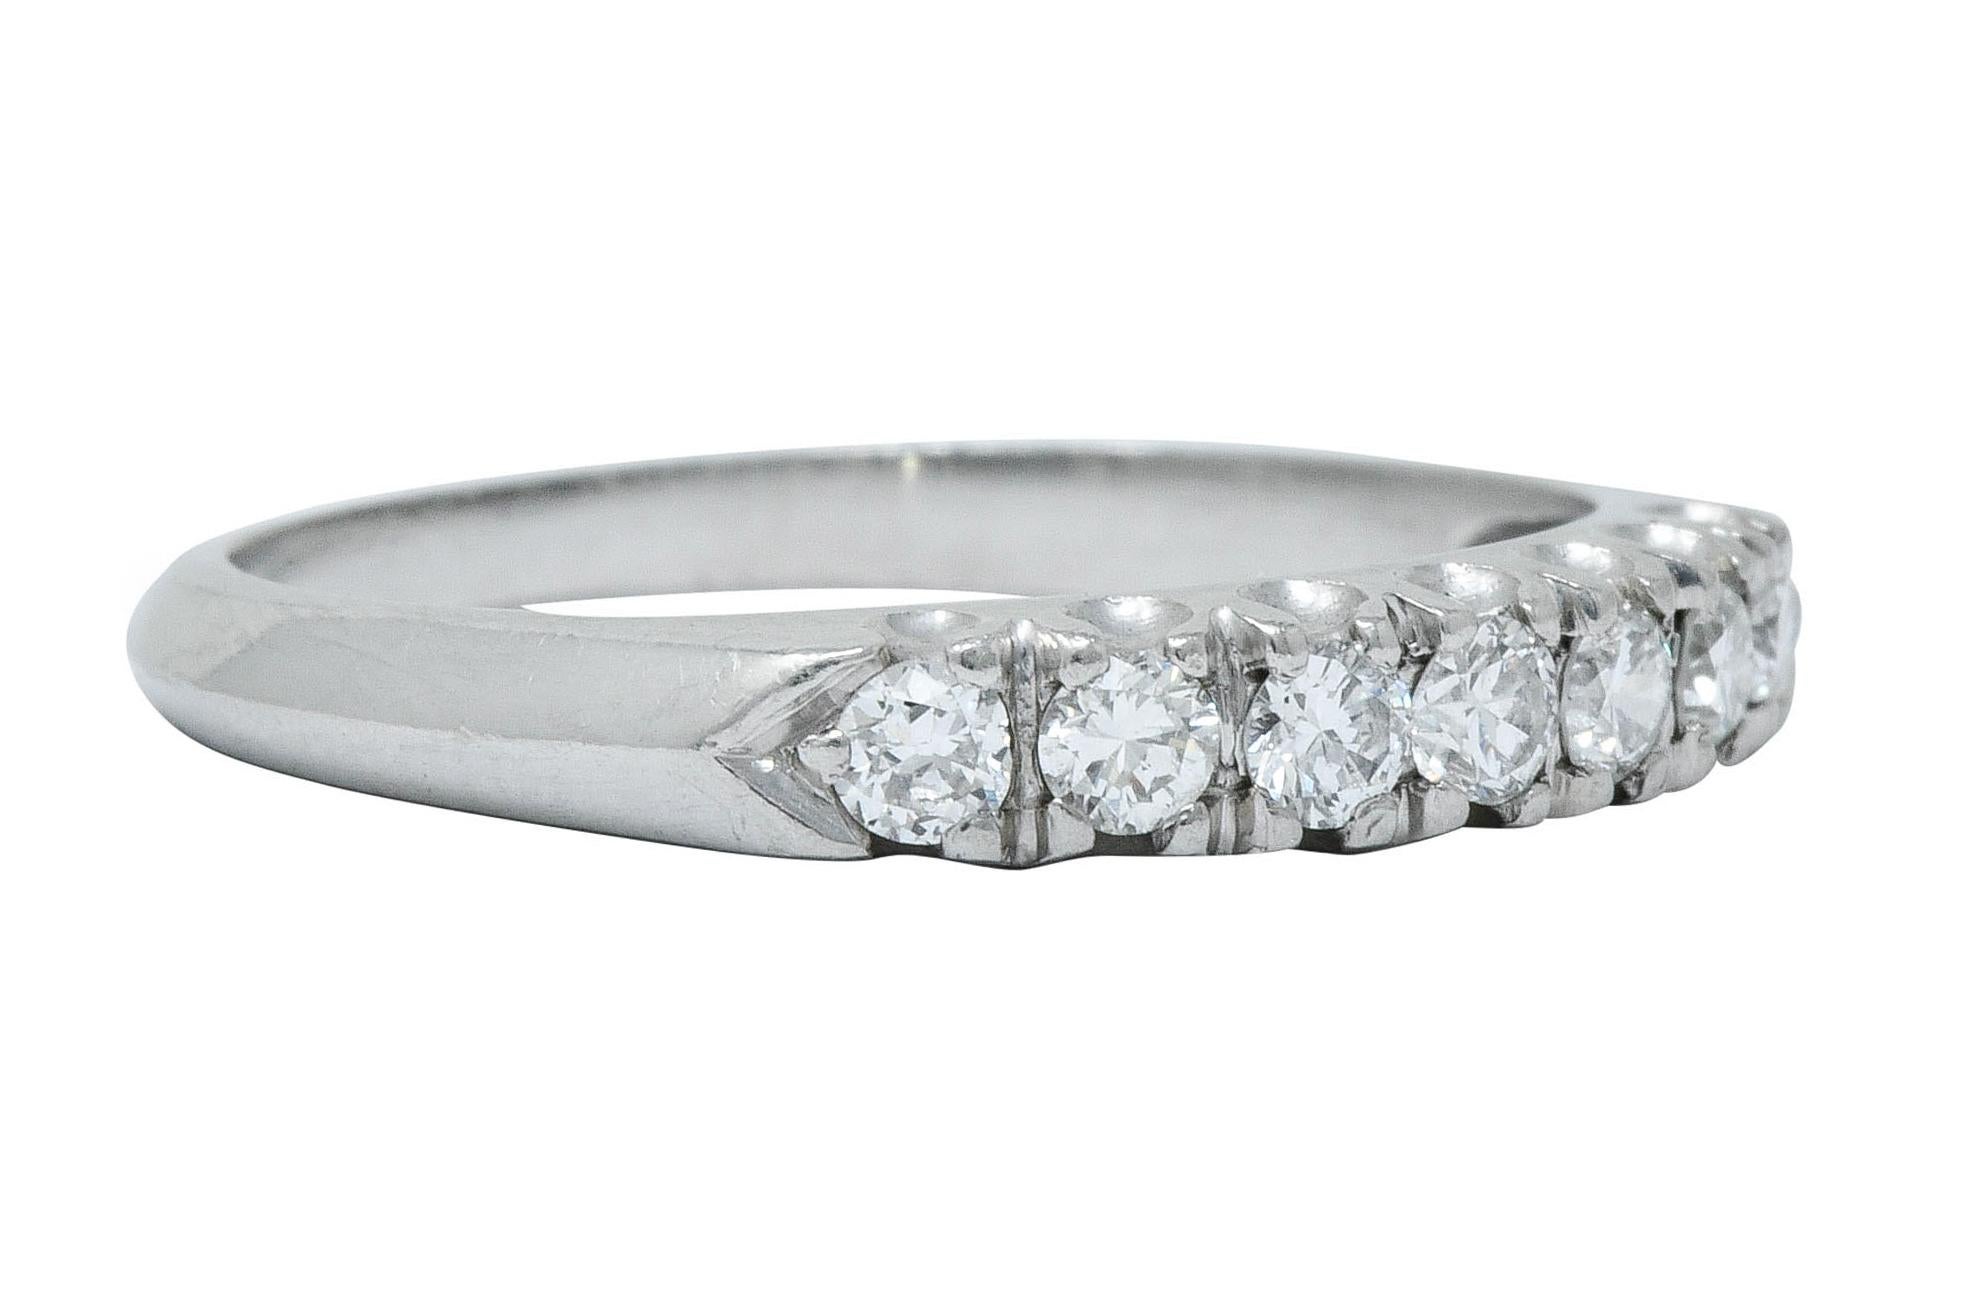 Band style ring set to front with seven round brilliant cut diamonds

Weighing approximately 0.45 carat total with G/H color and VS clarity

Completed by a fishtail style gallery and pointed shoulders with a knife edged shank

Stamped for